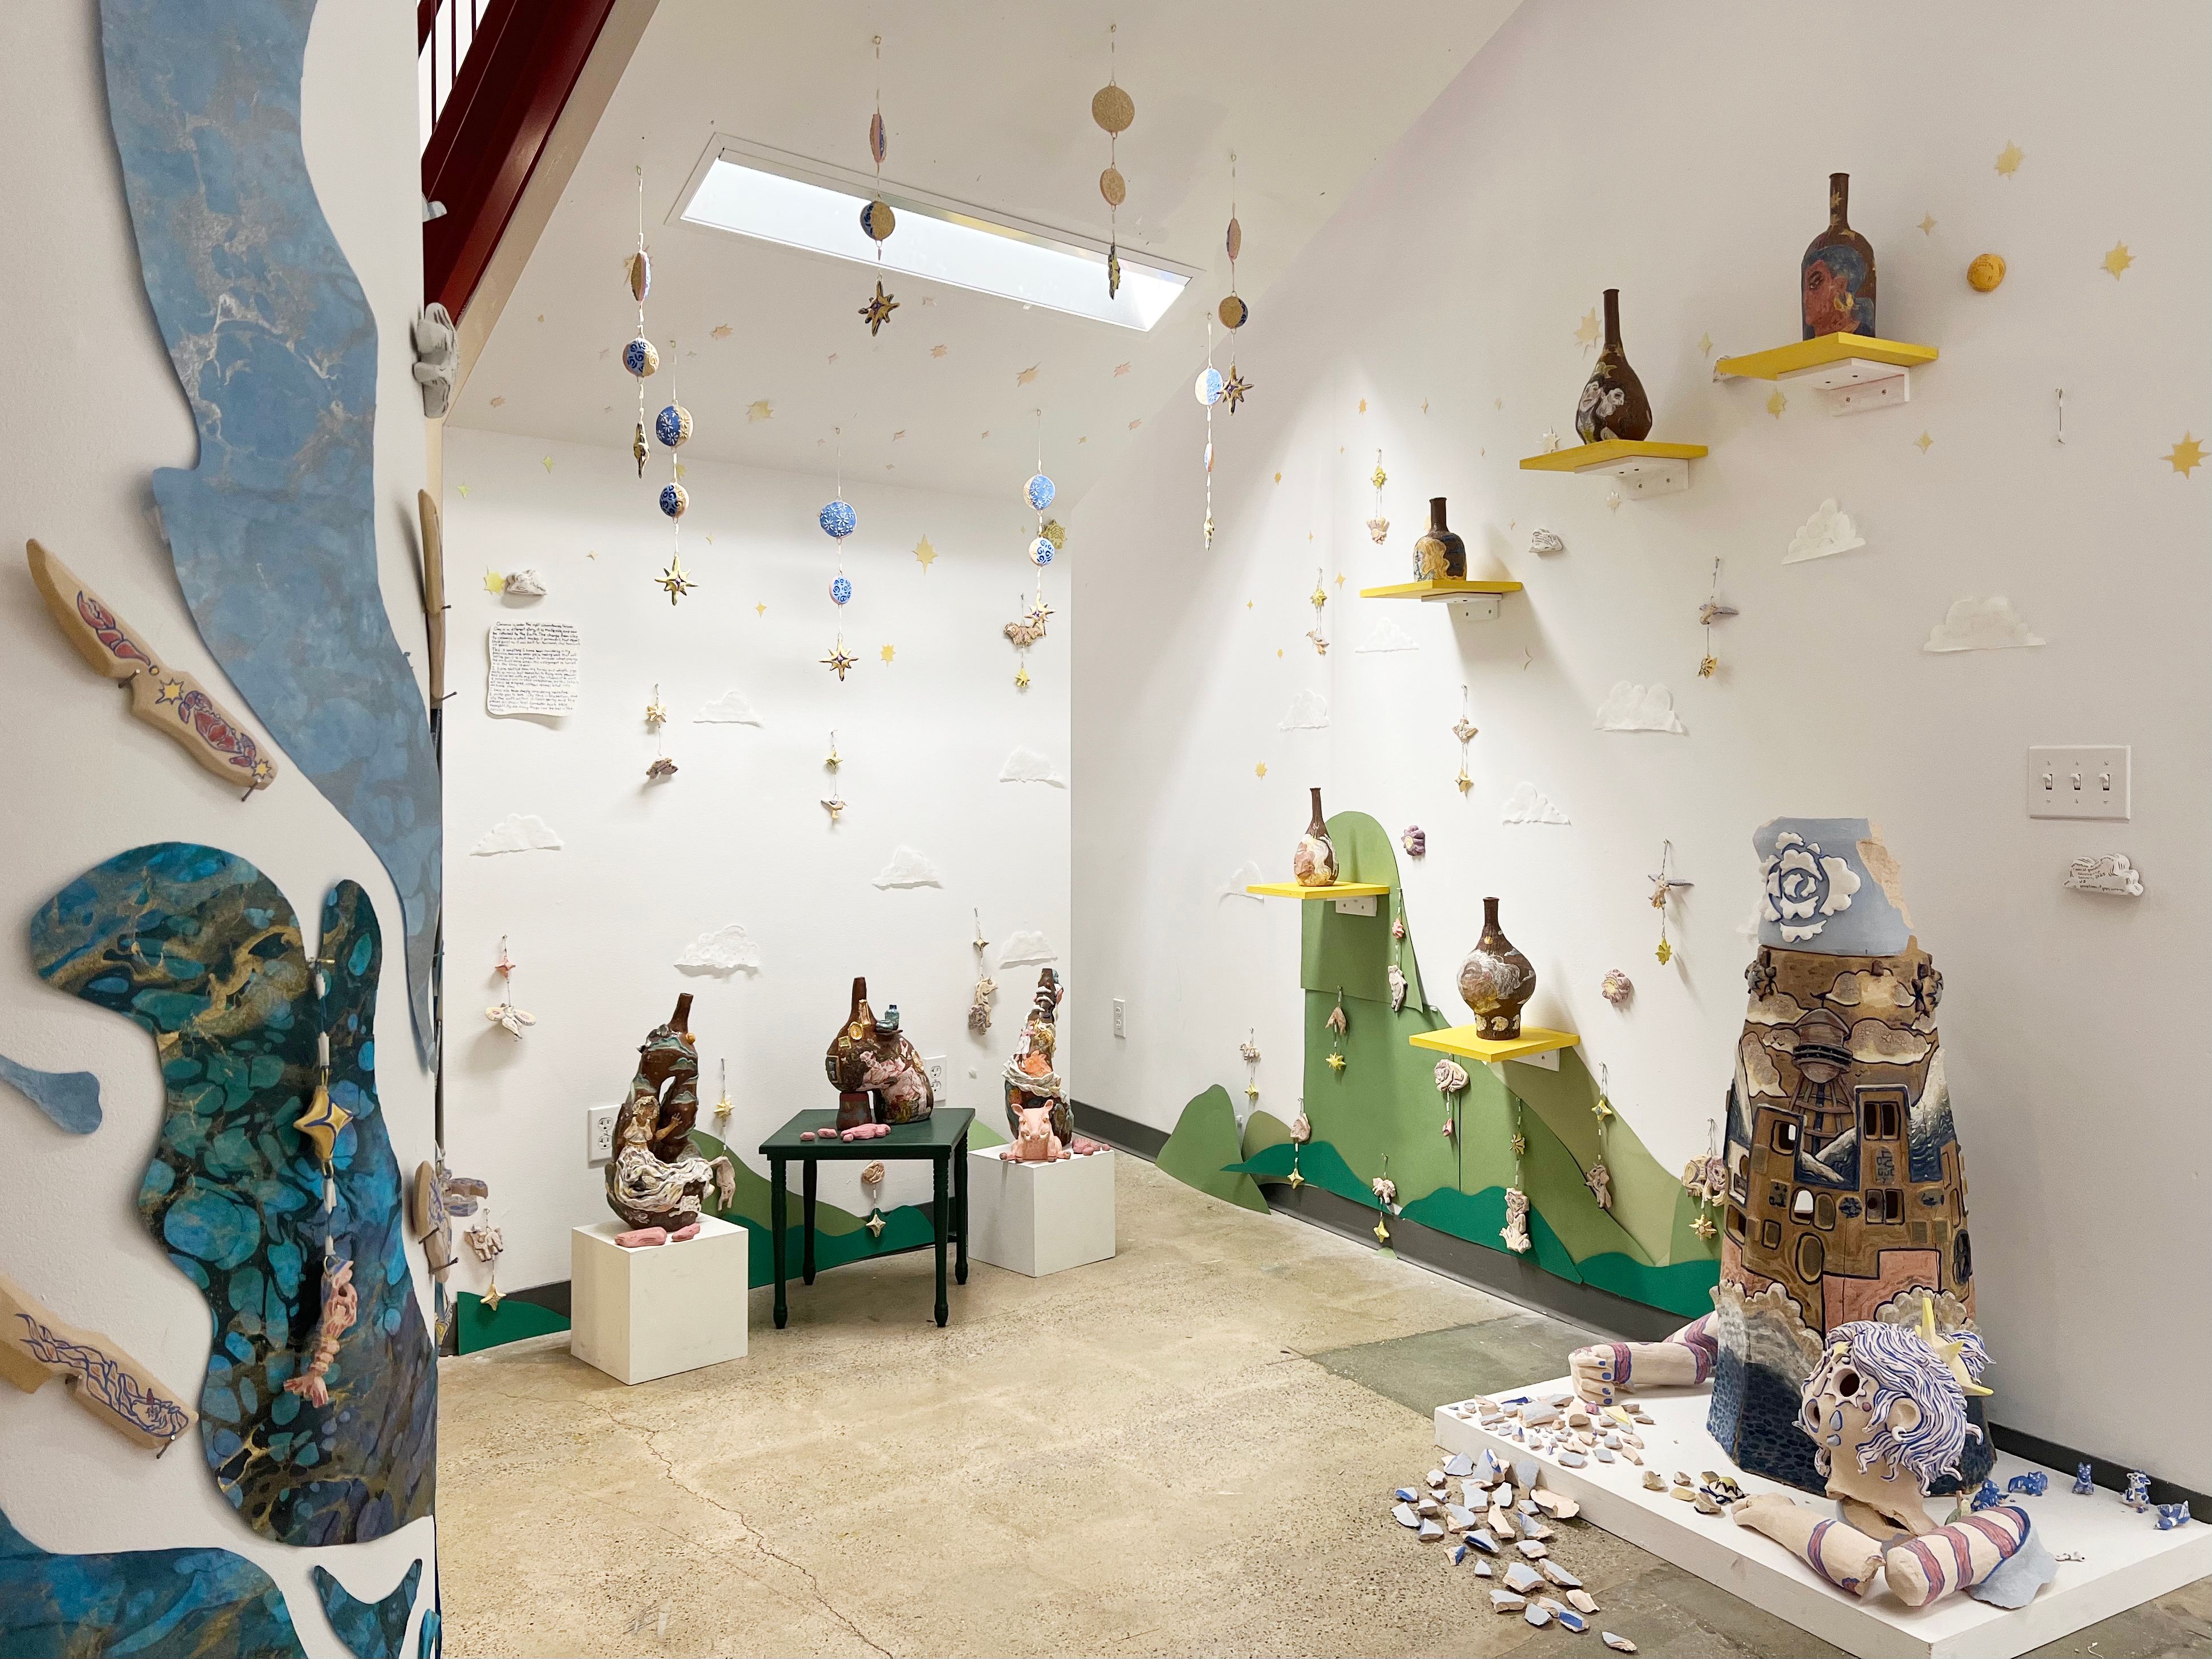 An installation of ceramic works, including vases and sculptures, with playful themes